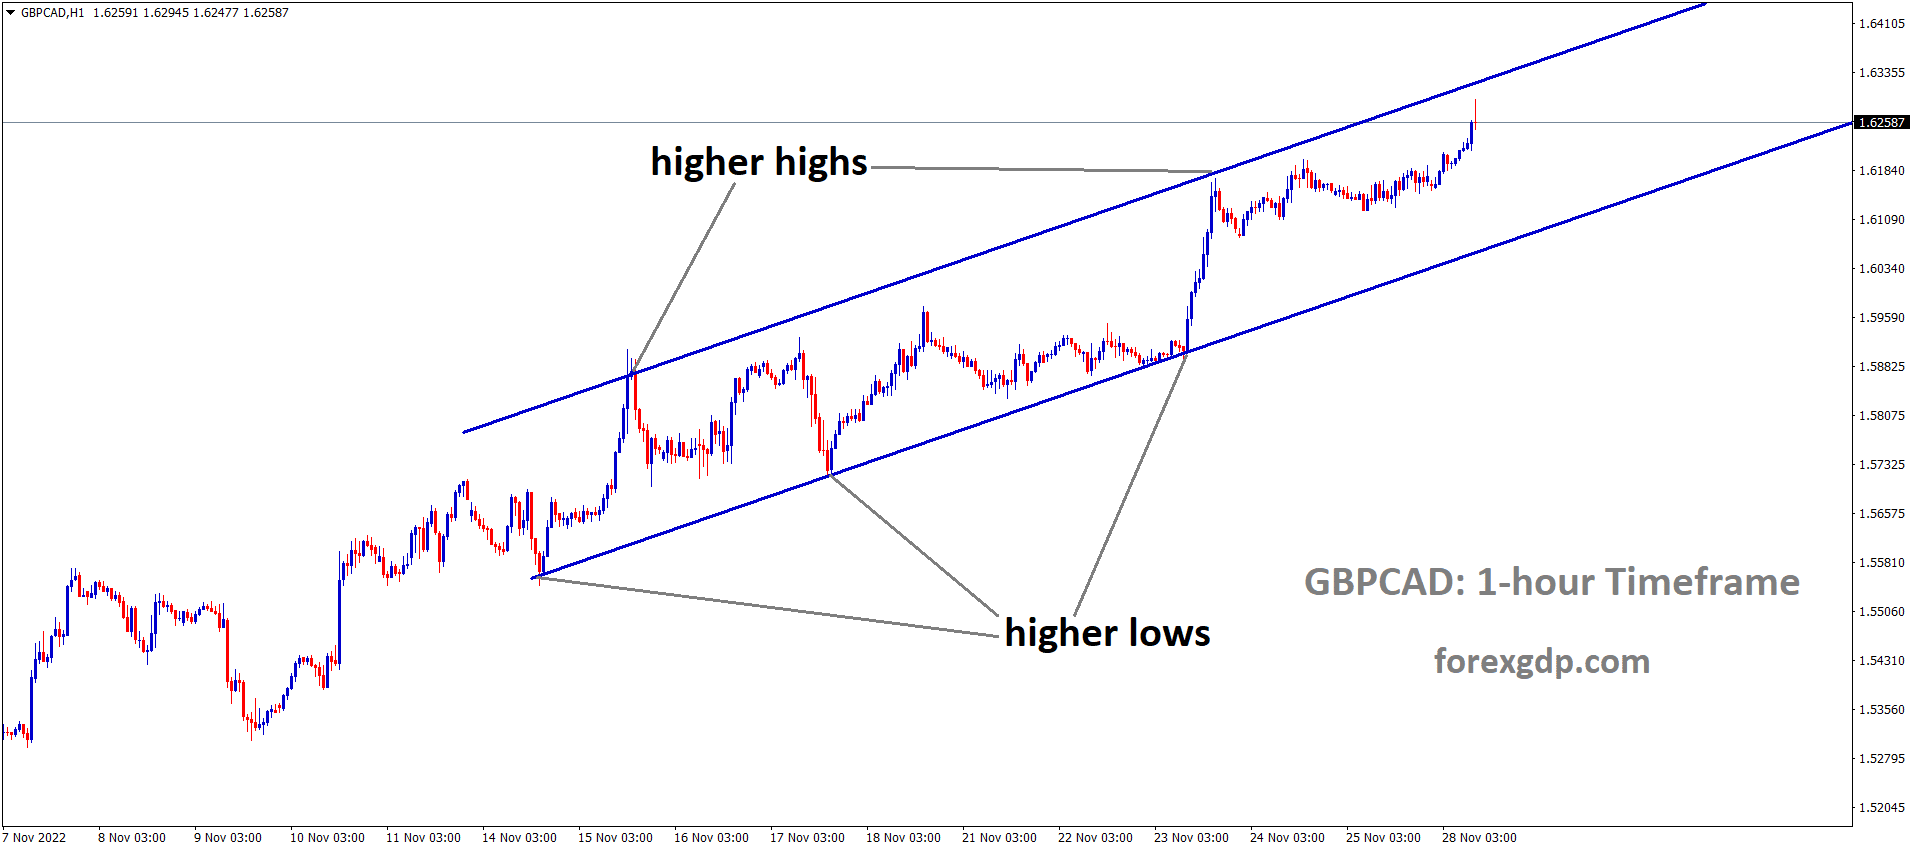 GBPCAD is moving in an Ascending channel and the market has reached the higher high area of the channel